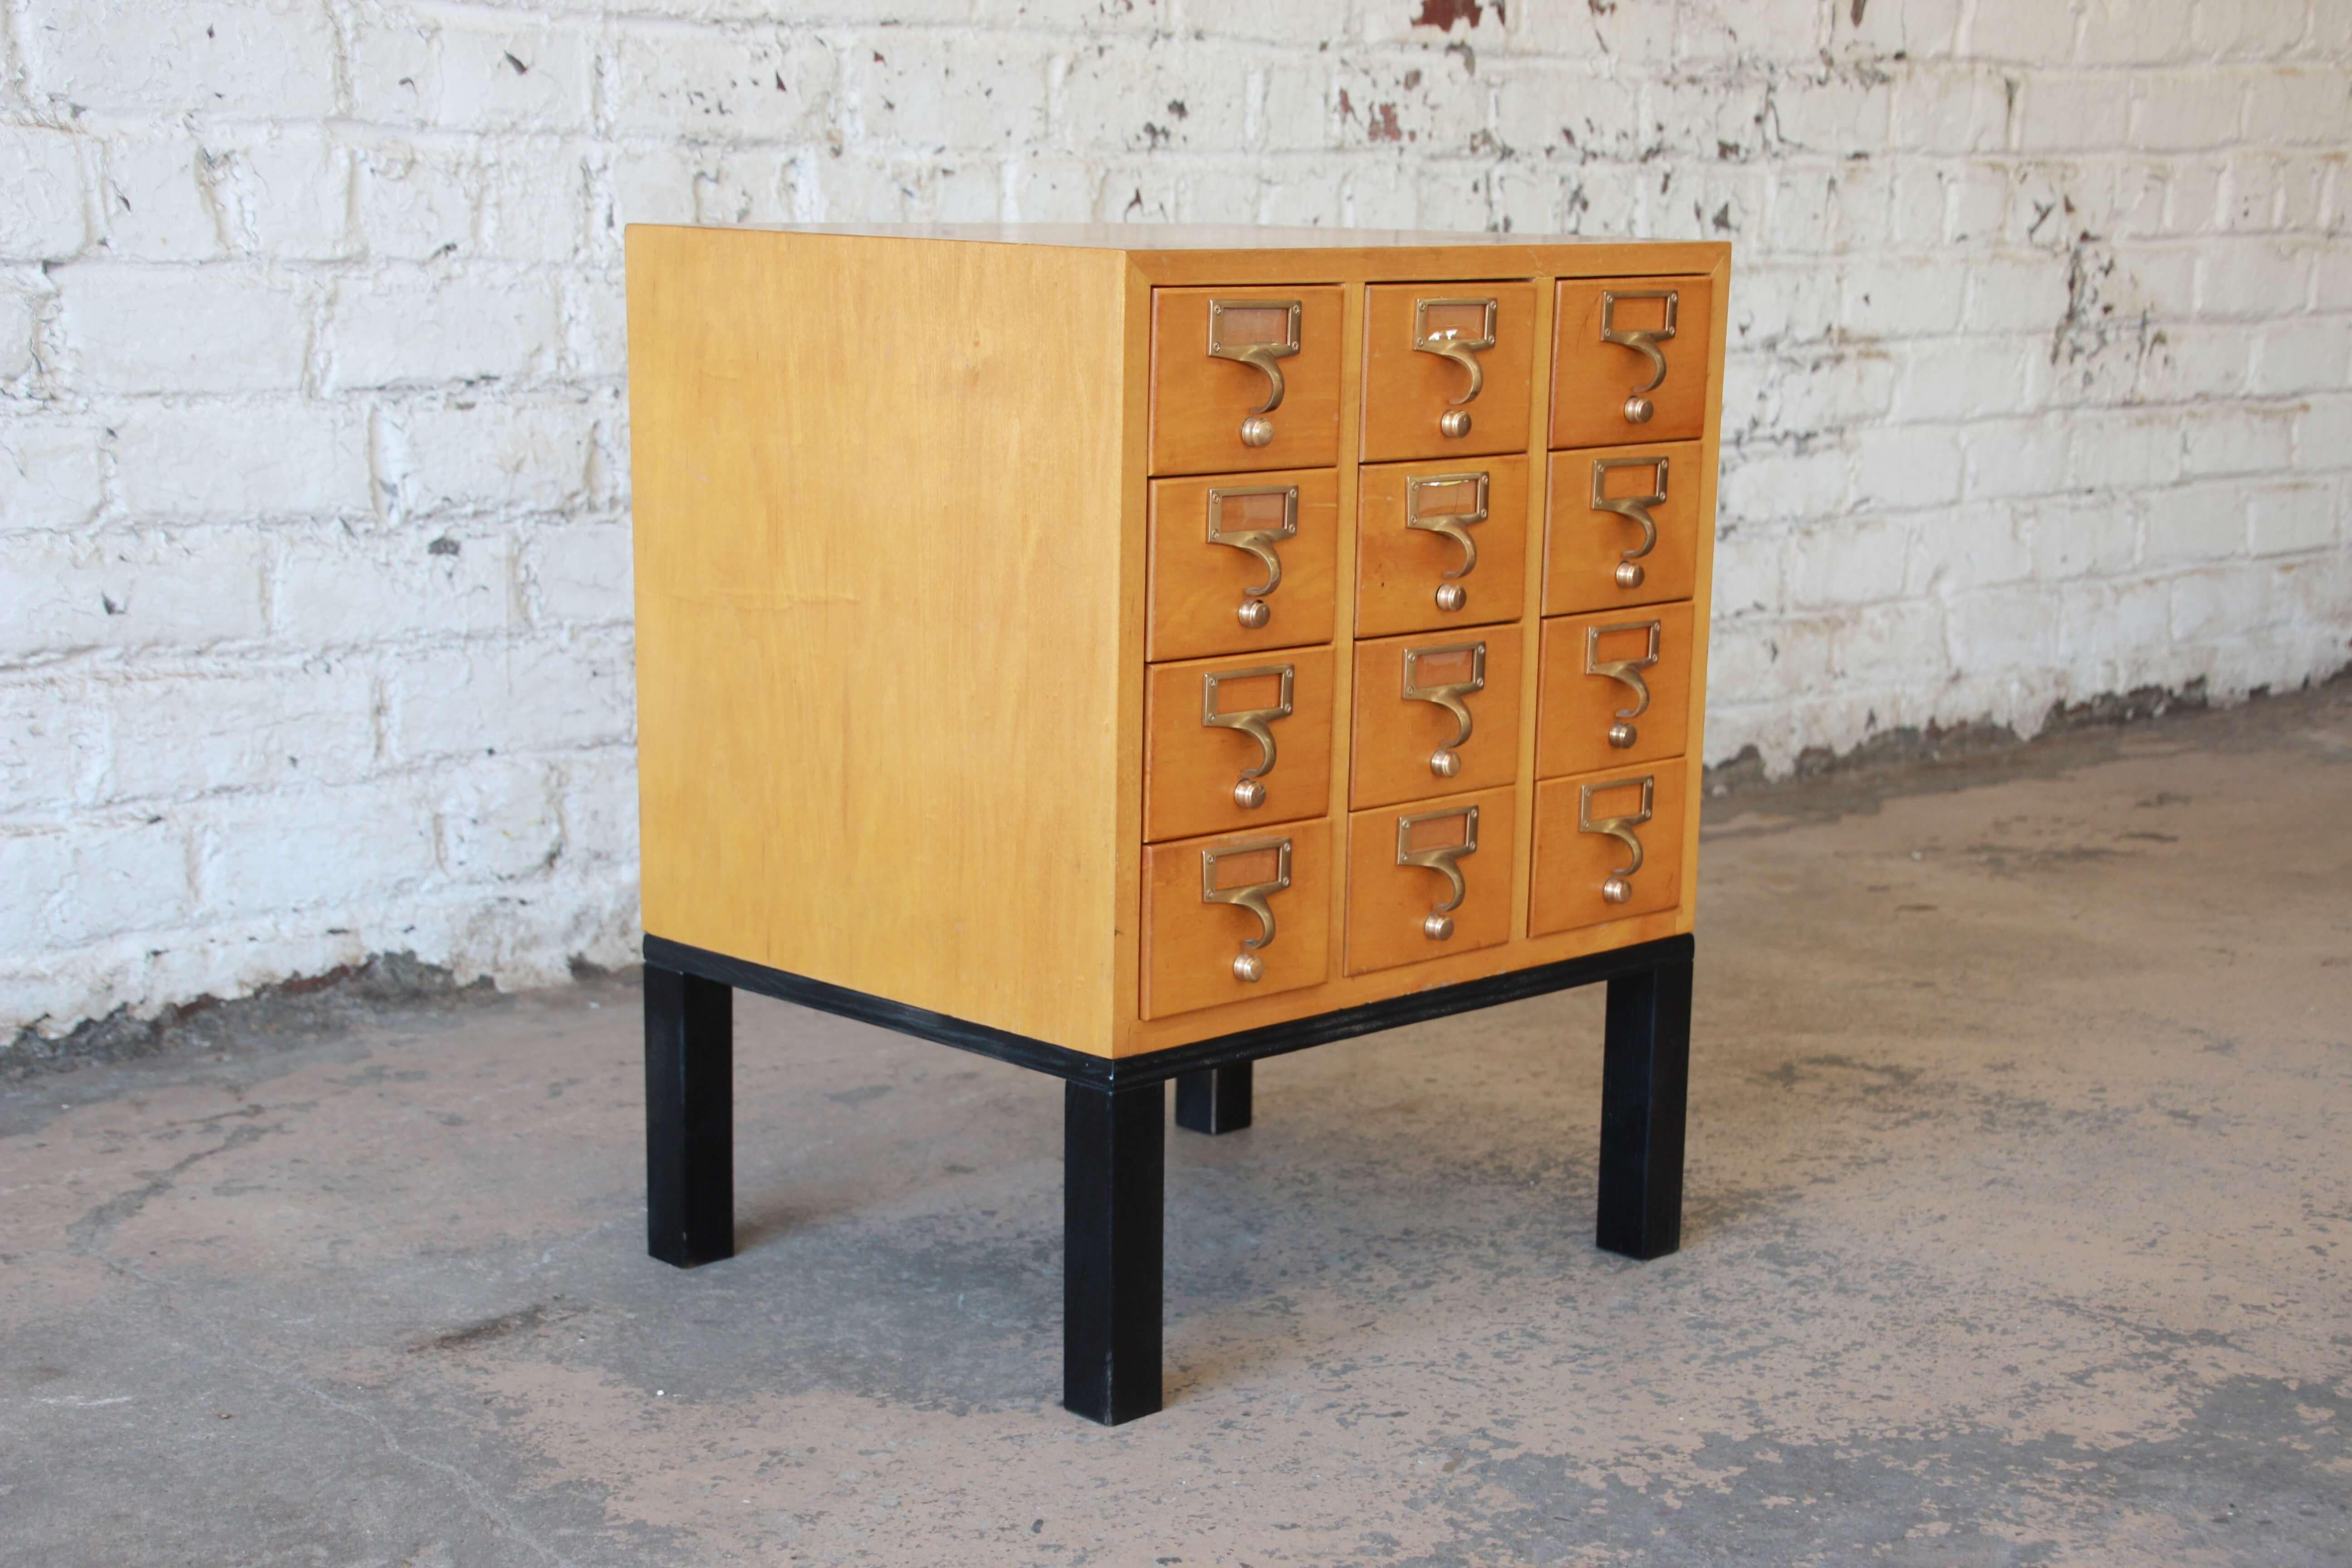 Offering a very nice and rare twelve -drawer card catalog by Gaylord Bros, Inc. This unique piece can easily function as a end/side table or nightstand. It sits on a custom black base and is made from solid birch. All drawer function and open and